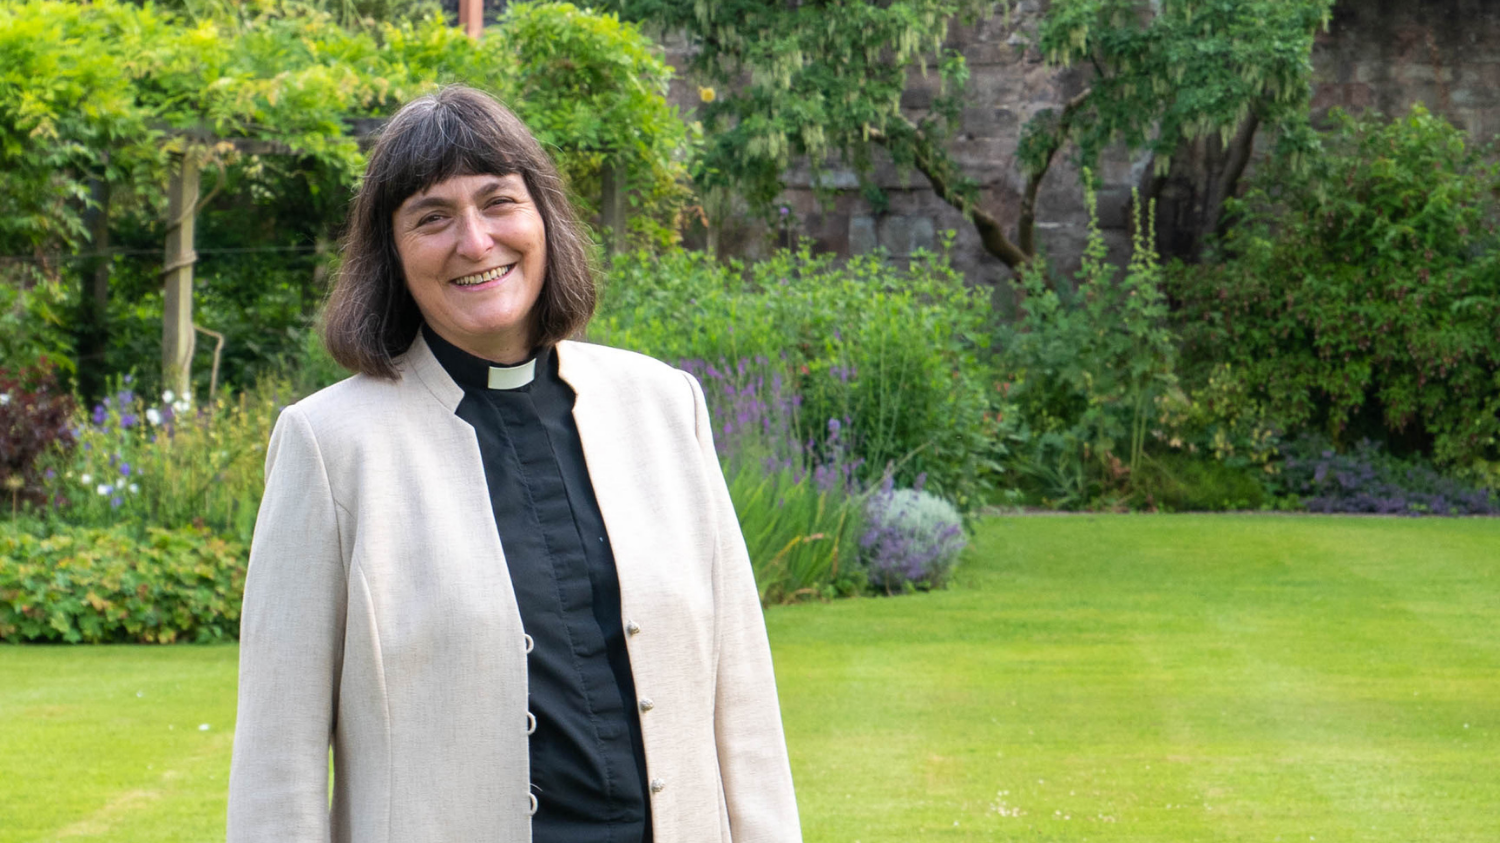 Dean of Hereford The Very Revd Sarah Brown with Hereford cathedral in background